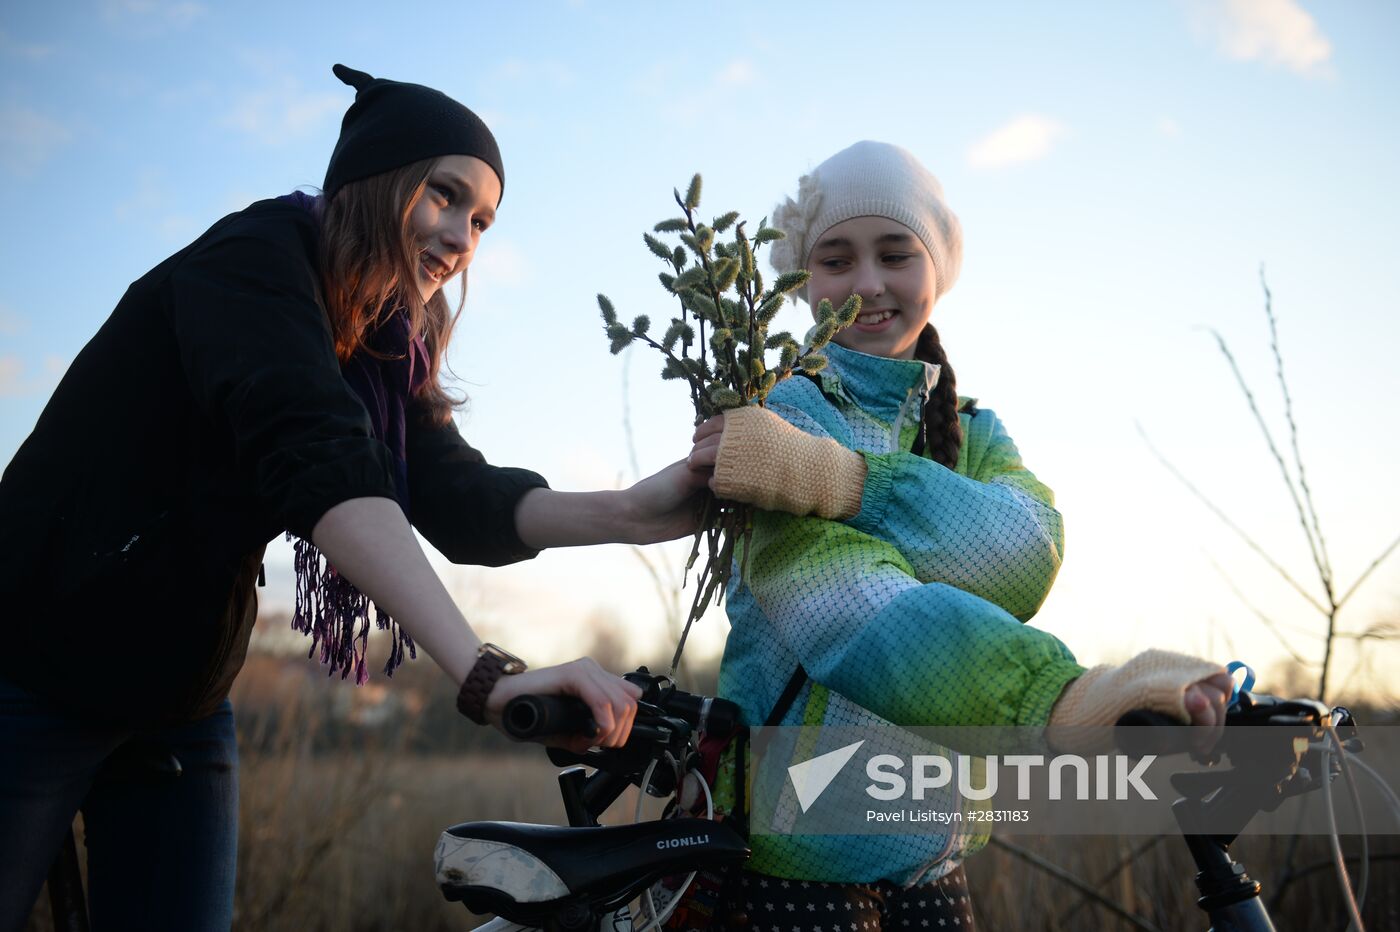 People collect willow branches for Palm Sunday on Lake Shartash in Yekaterinburg